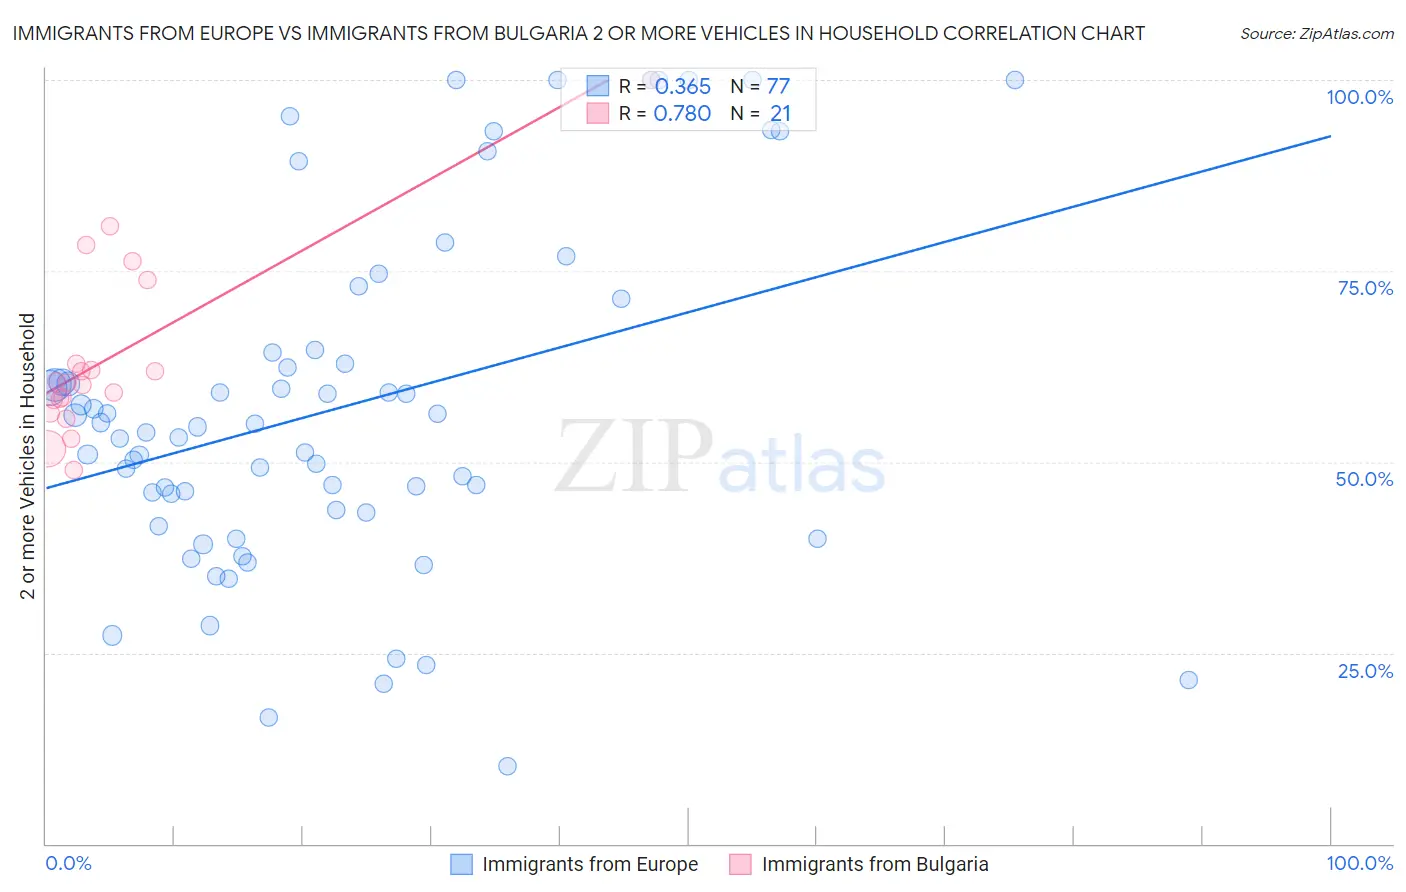 Immigrants from Europe vs Immigrants from Bulgaria 2 or more Vehicles in Household